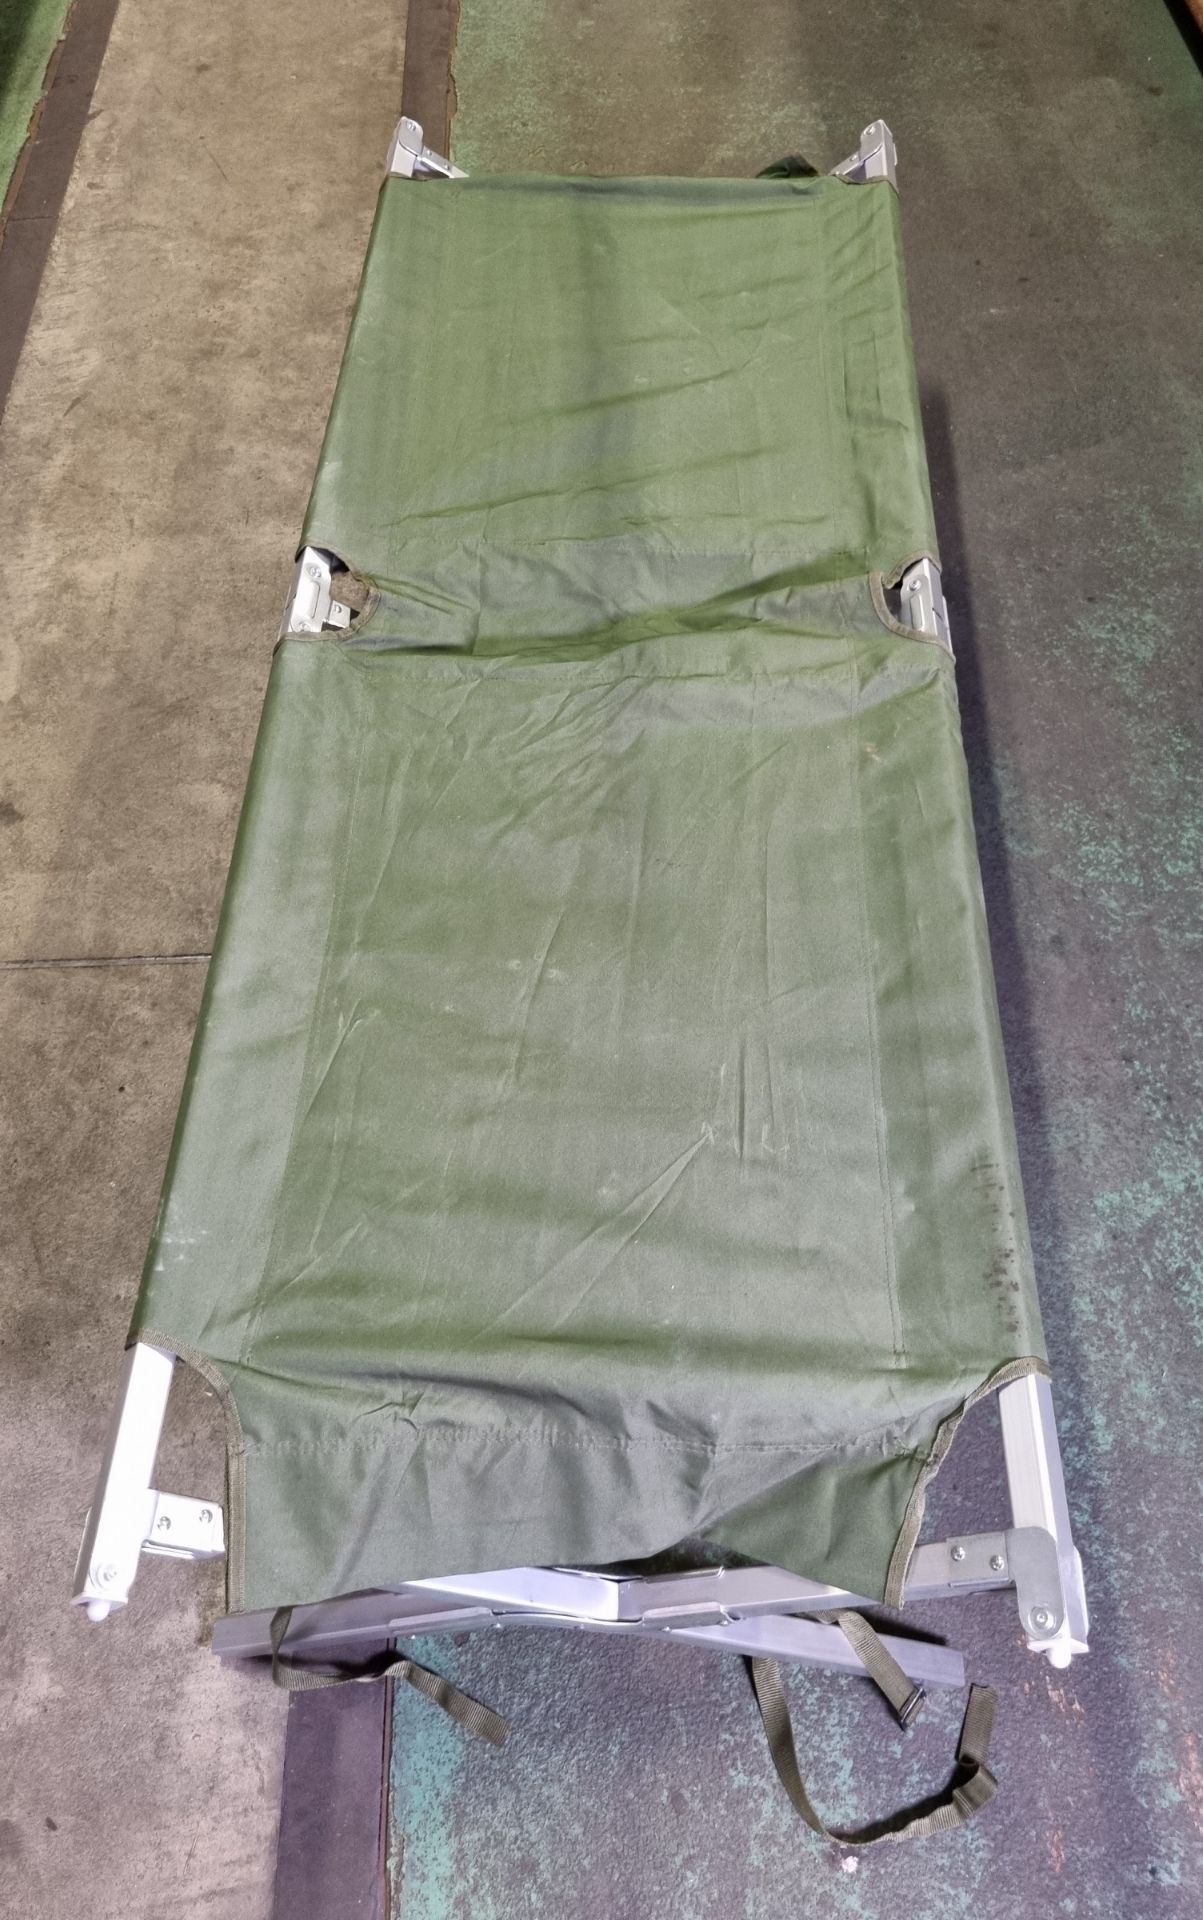 15x Folding field cots with carry bag - L 1900 x W 700 x H 450mm - Image 3 of 4